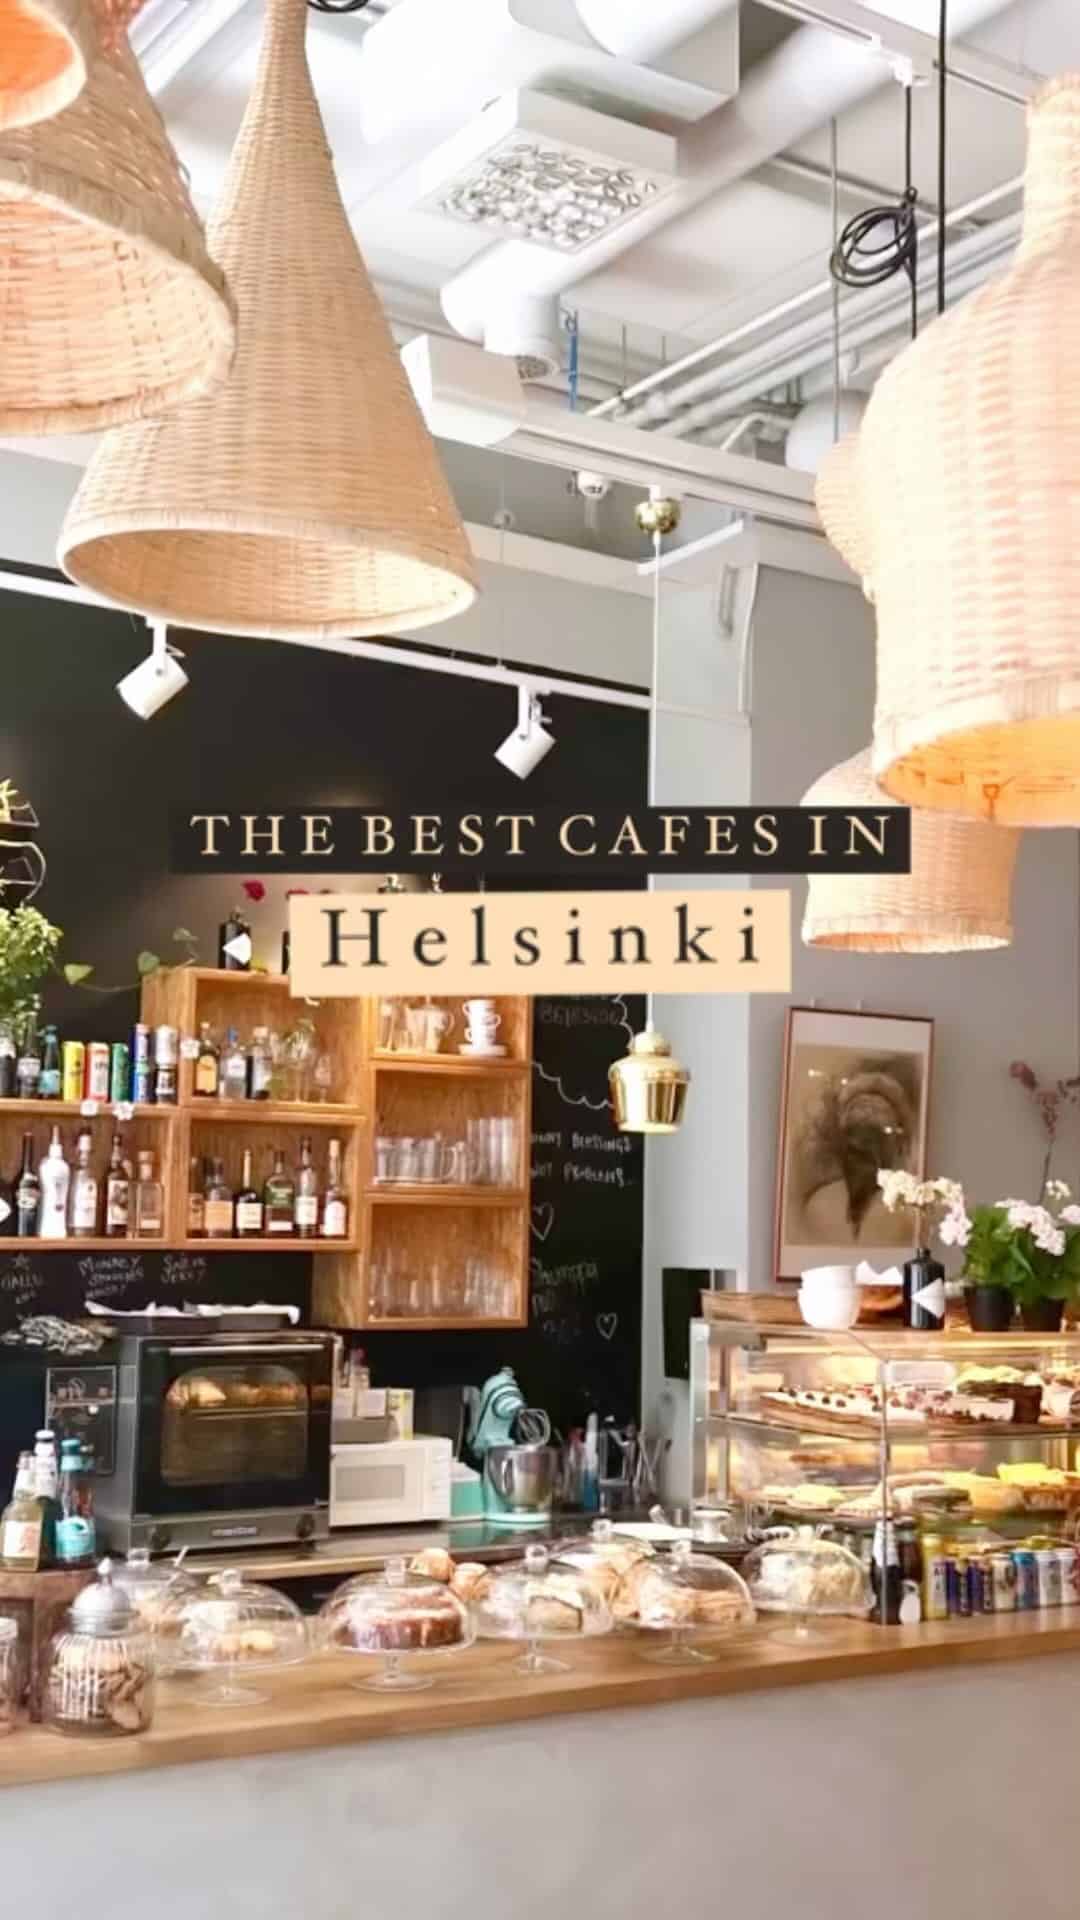 Best cafes in Helsinki 🇫🇮
⠀
☕️ If you’re a coffee-lover like me, you’d be interested to know that Helsinki is huge on coffee (Kahvi) culture with Kahvila’s (coffee shops) galore.
⠀
🔗Head to be-lavie.com or the link in my bio for a round up of all things coffee in Finland’s capital plus a list of cafes by neighbourhood.
⠀
🎞 Sneak peek of some favourites in the reel
⠀
🤍 Save for your Helsinki bucket list and follow @be_lavie for more 🌍 & 🌱 inspo.
⠀
⠀
⠀
⠀
⠀
#helsinkiofficial #myhelsinki #helsinki #kahvila #helsinkicafes #be_lavie #coffeelovers #coffee #coffeeshop #coffeelover #coffeeaddict